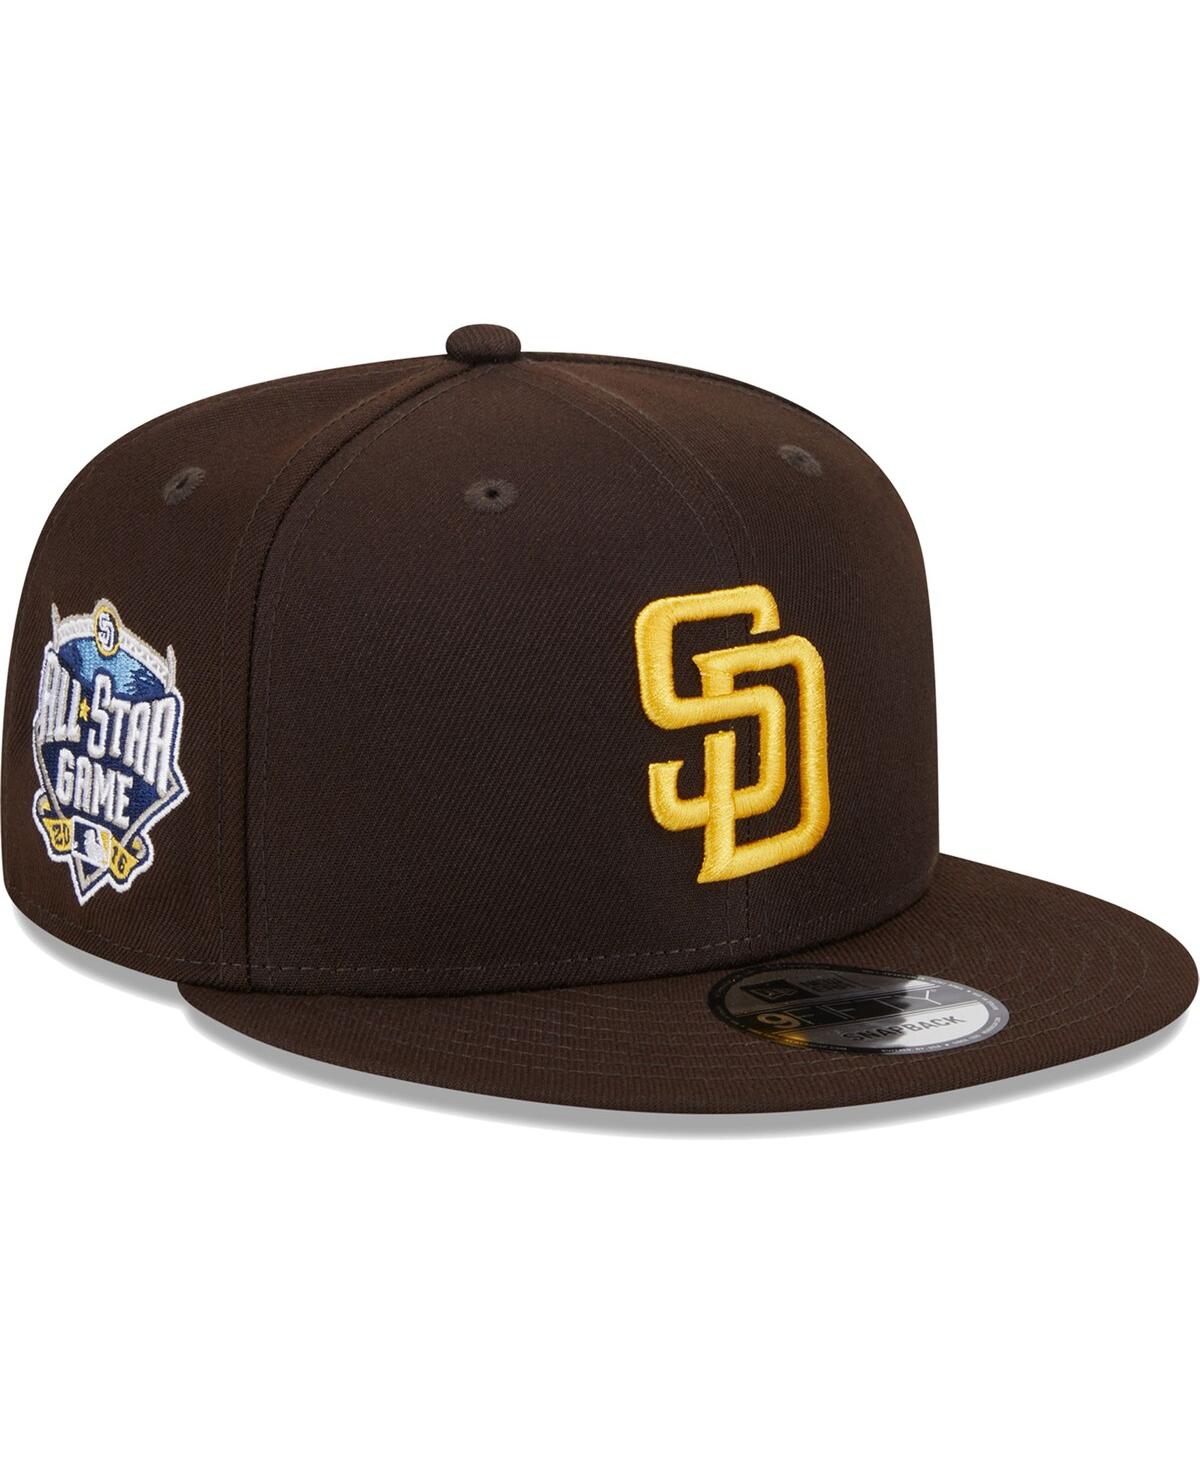 NEW ERA MEN'S NEW ERA BROWN SAN DIEGO PADRES 2016 MLB ALL-STAR GAME SIDE PATCH 9FIFTY SNAPBACK HAT